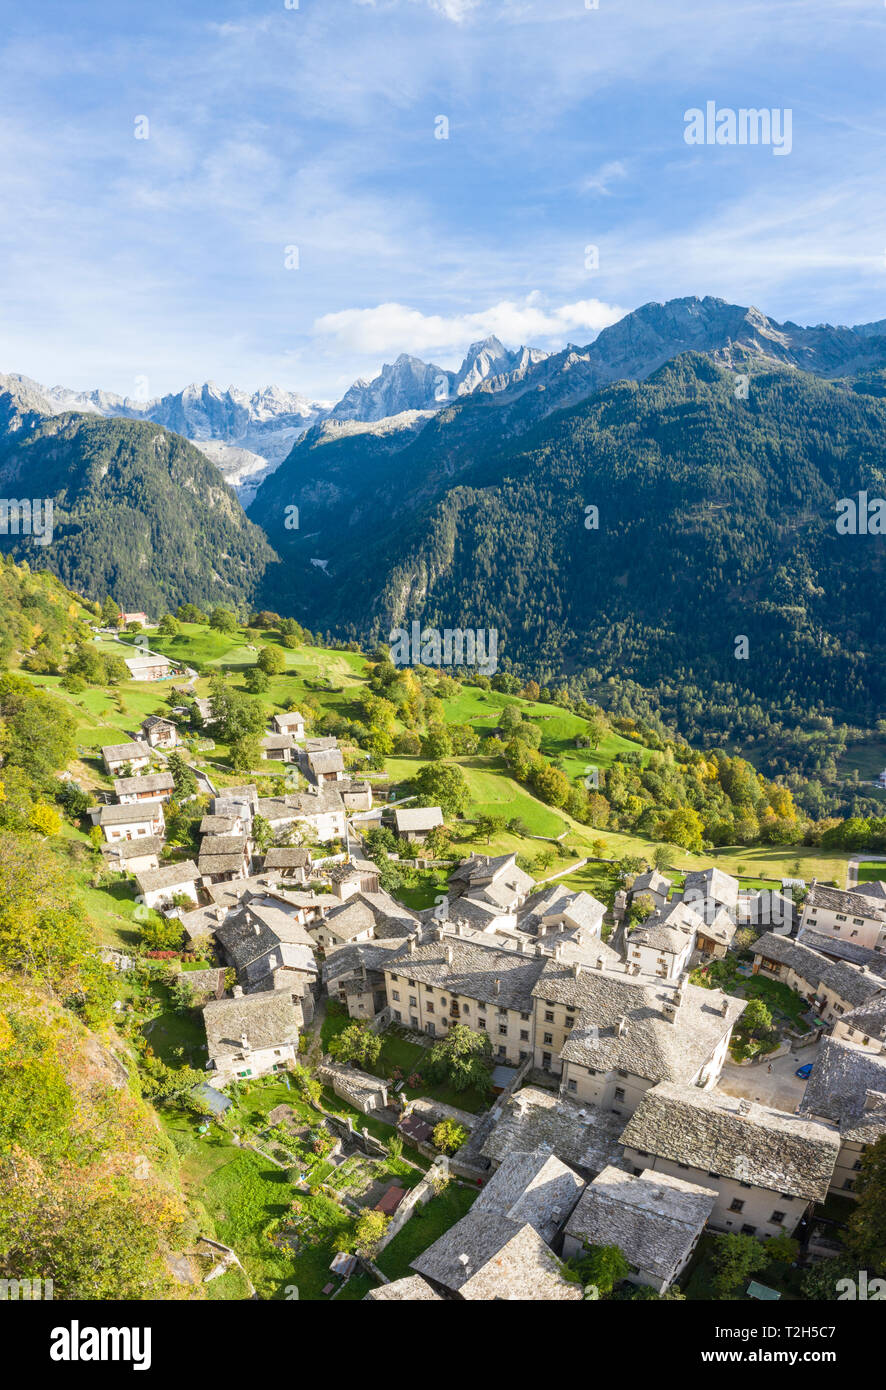 Town of Soglio by mountains Piz Cengalo and Badile in Switzerland, Europe Stock Photo